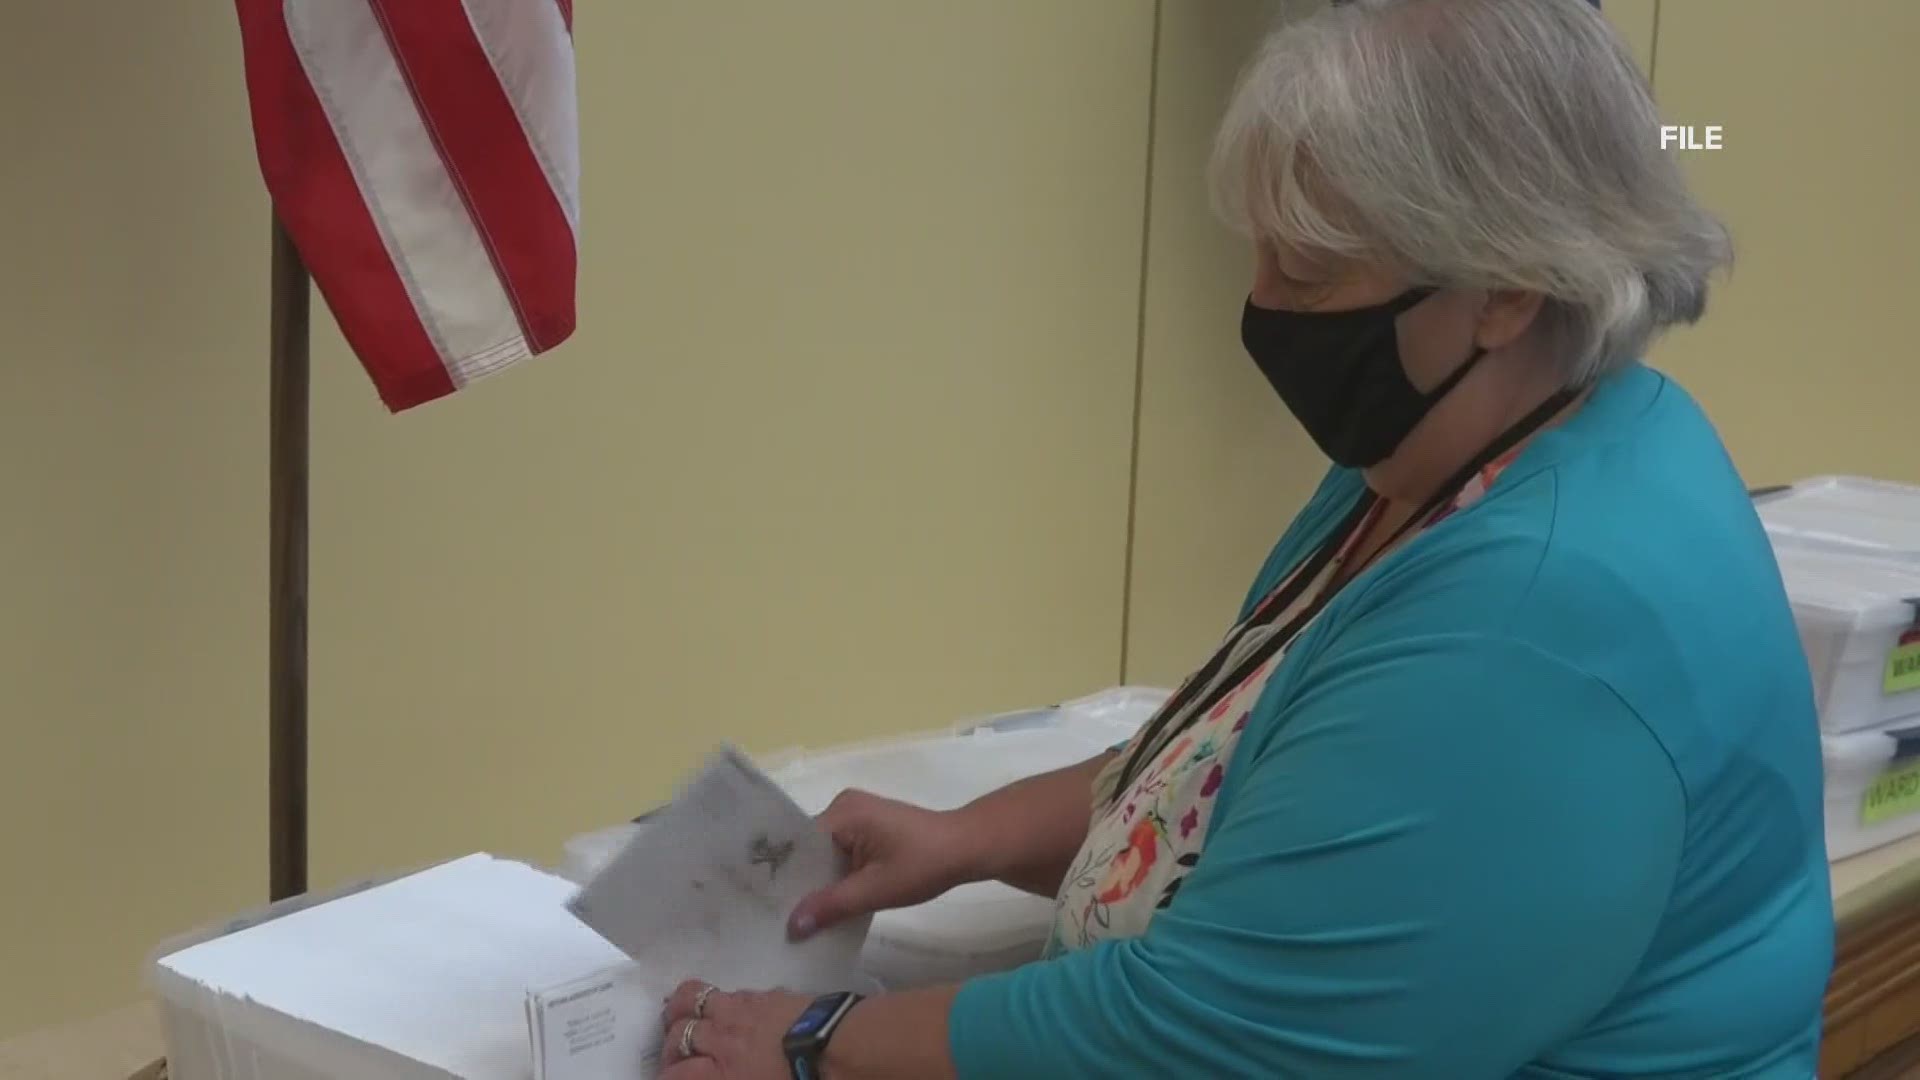 If you plan to head to the polls, officials are strongly encouraging people to wear masks.